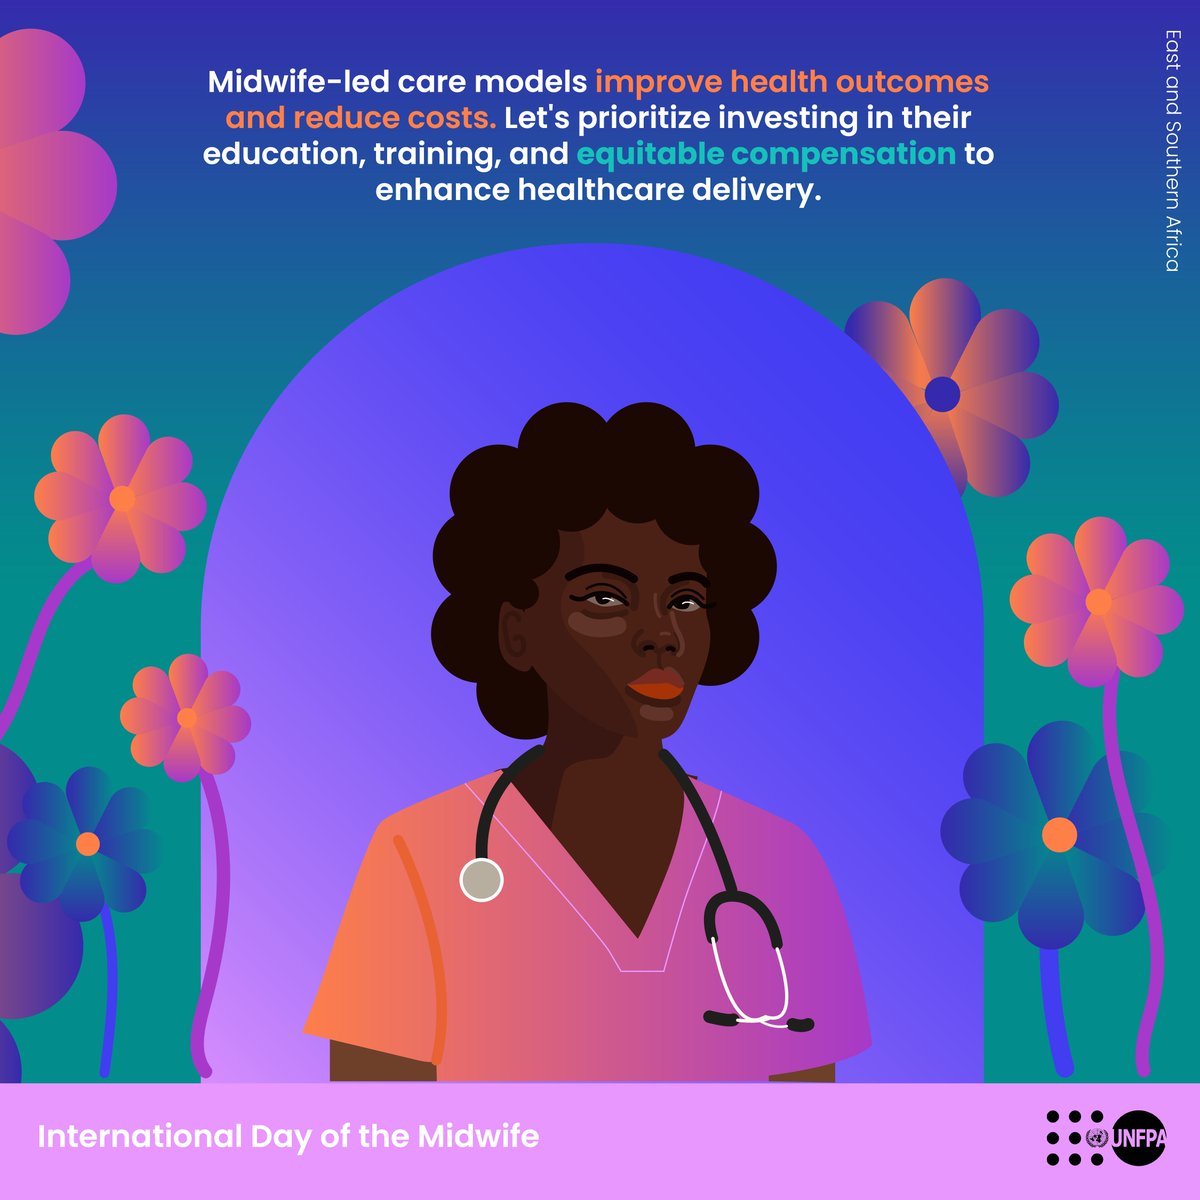 Strengthening the midwifery workforce requires investment in education, training, coaching, mentoring, leadership, fair wages, and a safe, supportive, and respectful work environment.